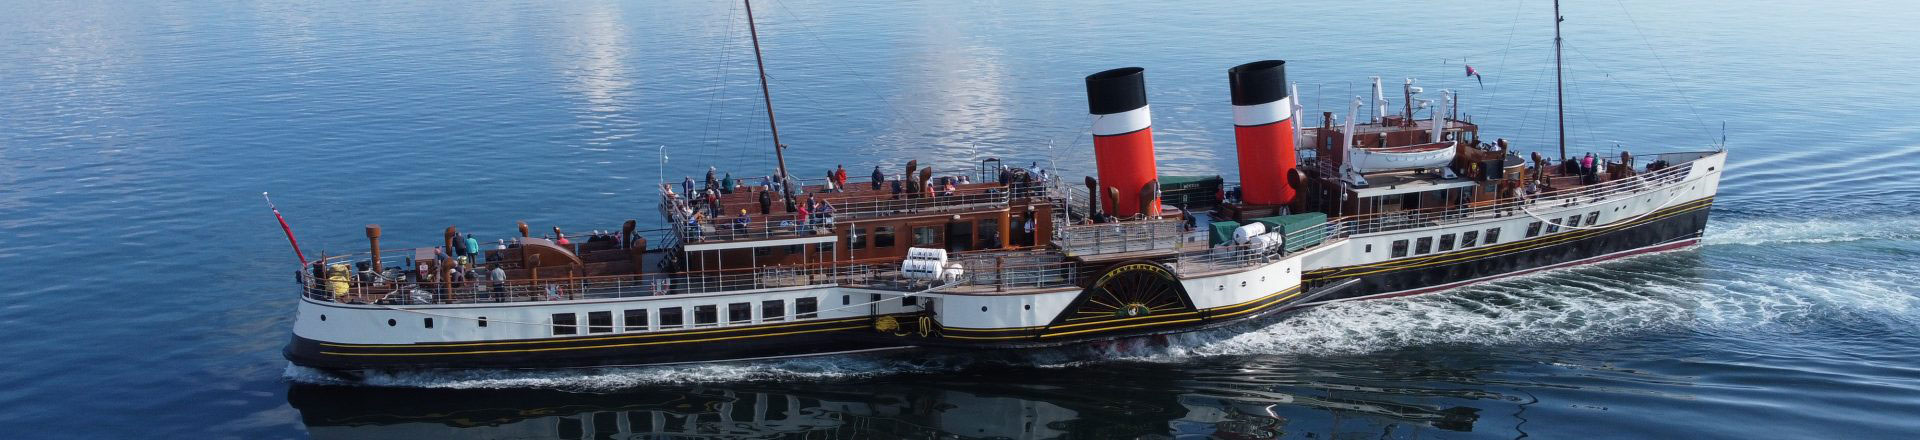 waverley excursions prices